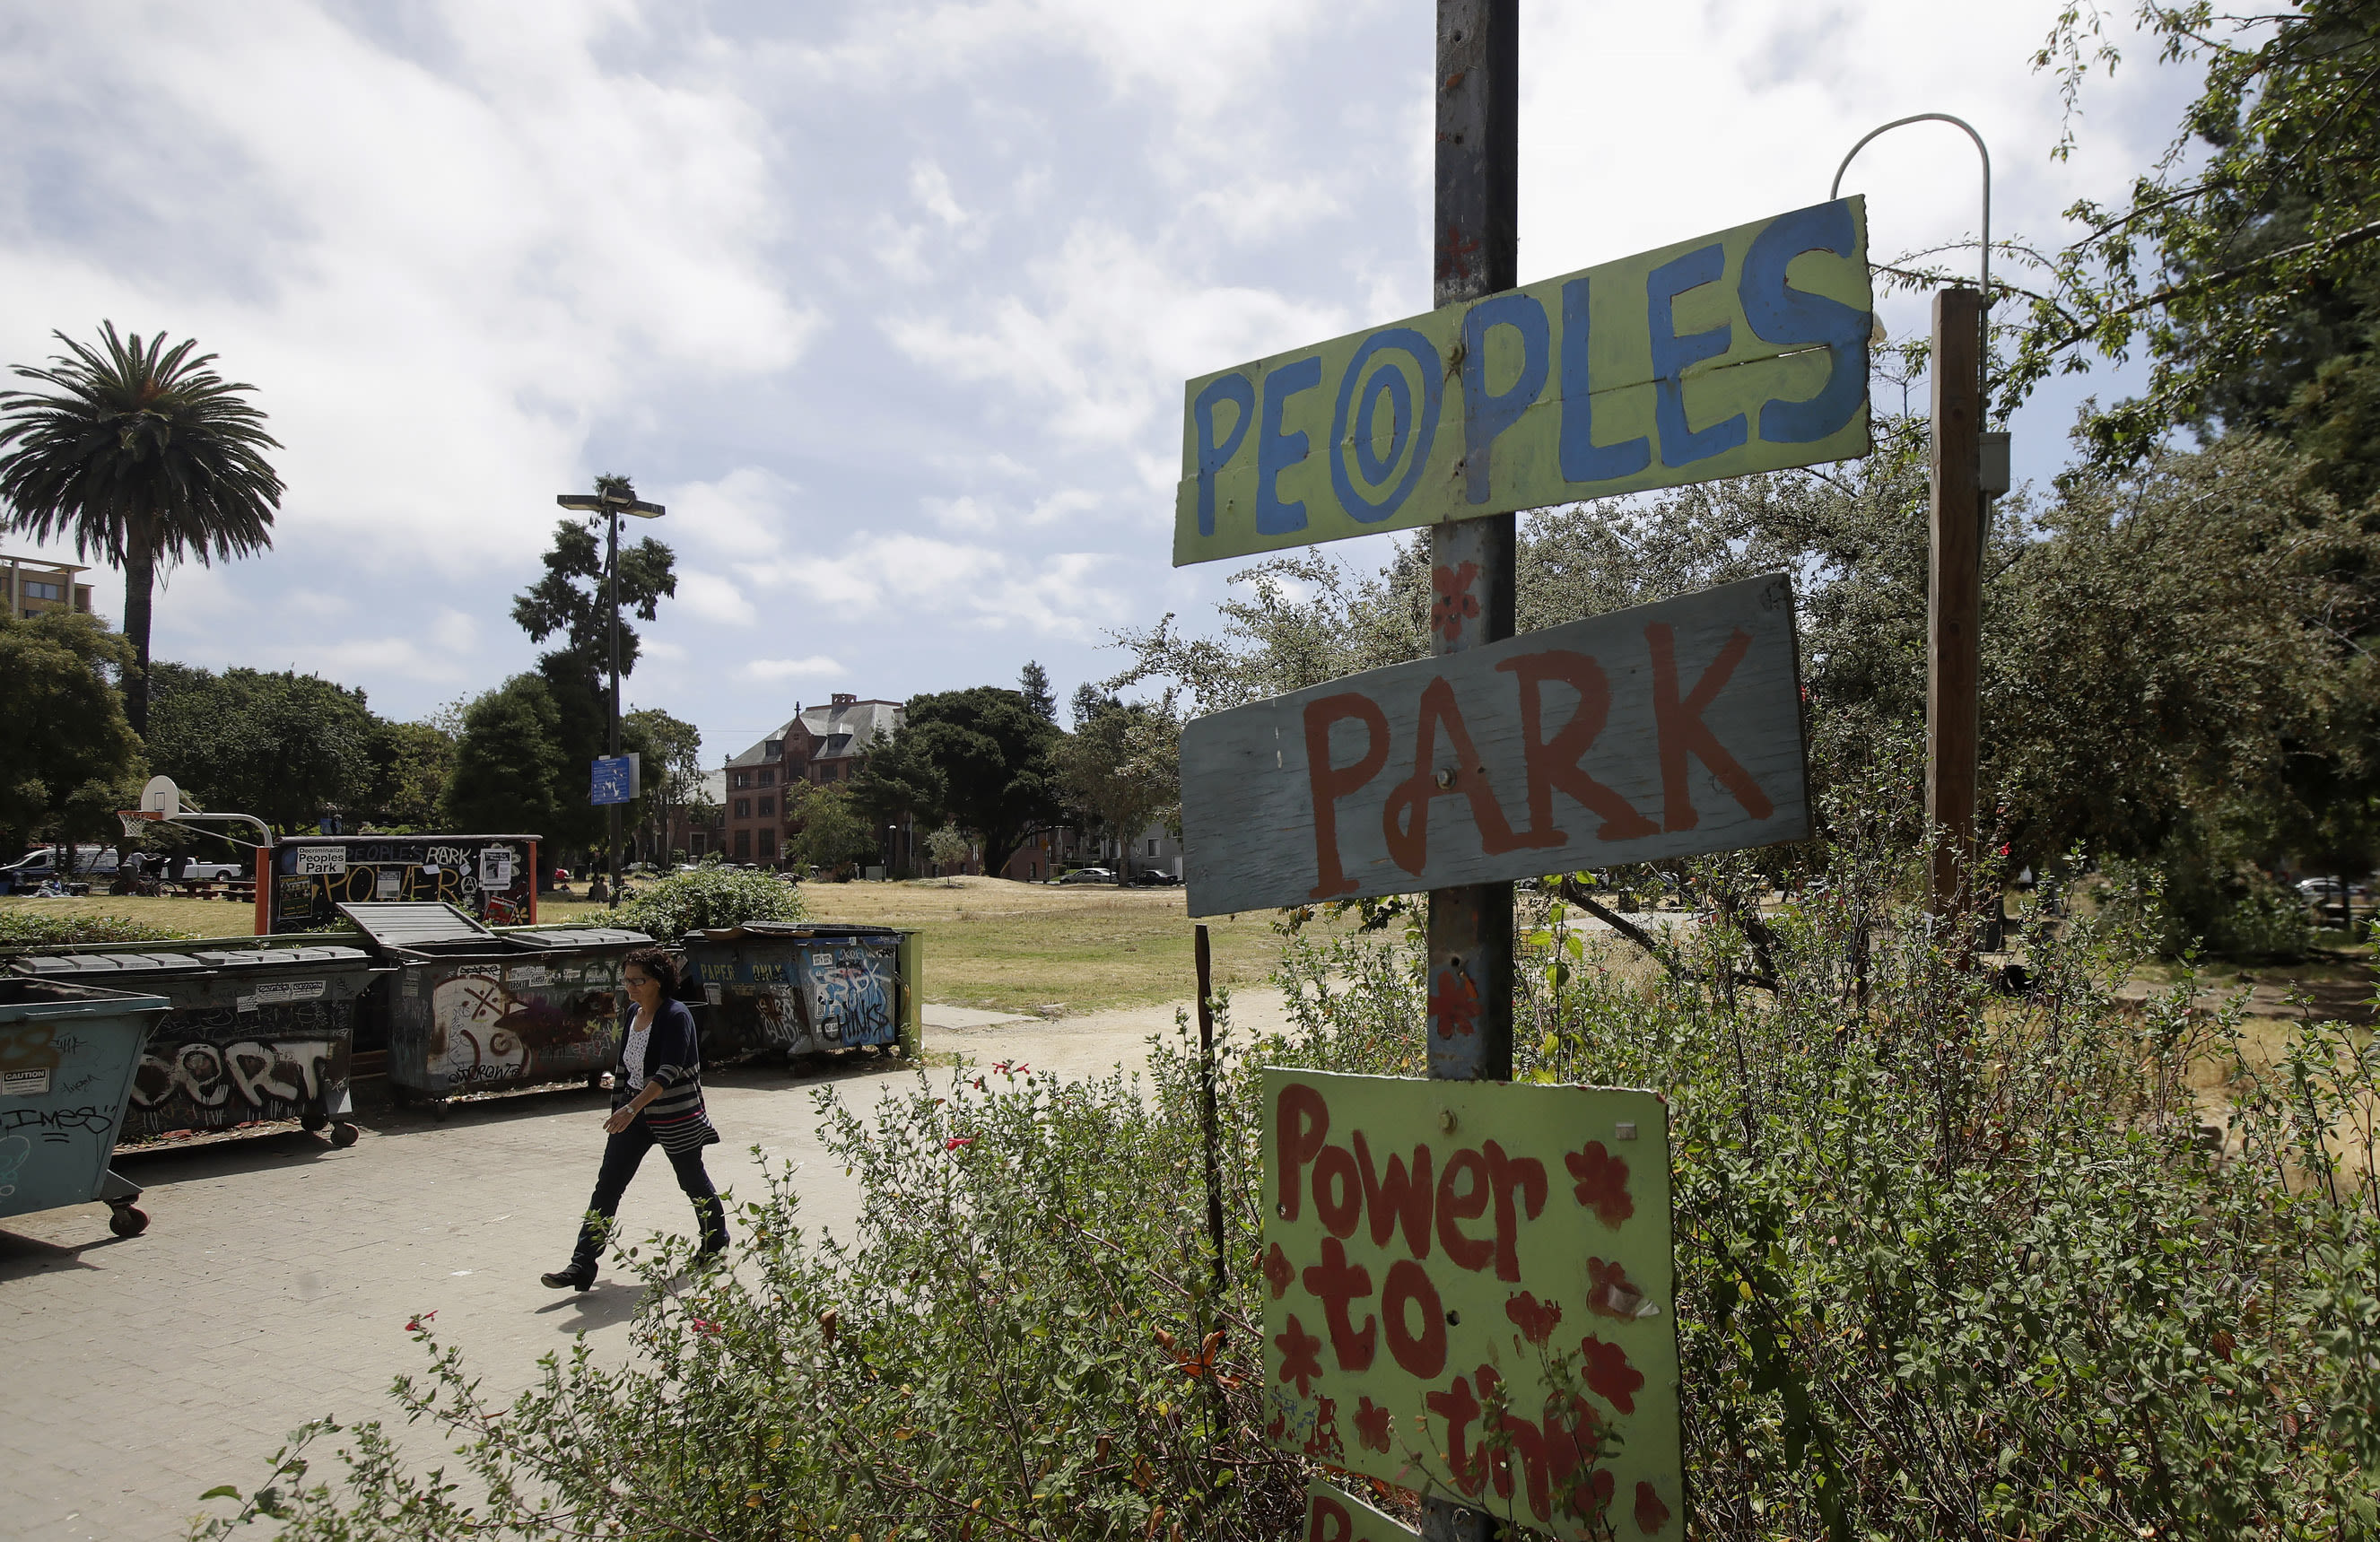 UC Berkeley’s legal victory allows People’s Park housing project to proceed — for now